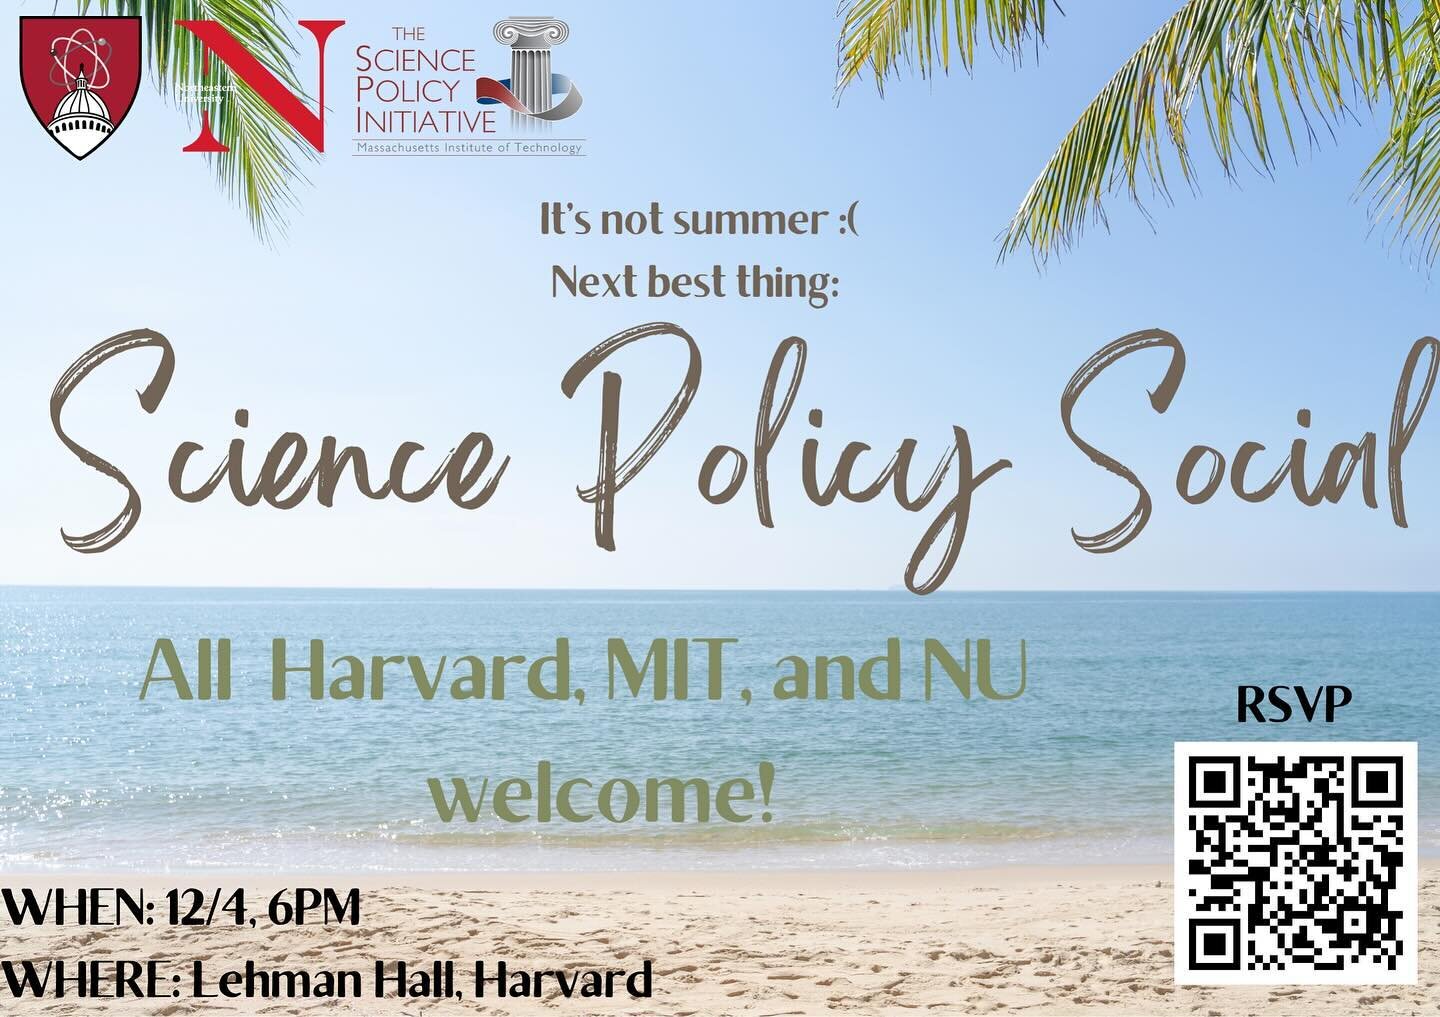 Please join SPI for a SCIENCE POLICY SOCIAL with Harvard and Northeastern next Monday, 12/4!

📅 When: Monday 12/4 at 6 pm
📍 Where: Lehman Hall at Harvard University
🙆&zwj;♀️ Who: all MIT affiliates interested in science policy and meeting folks wi